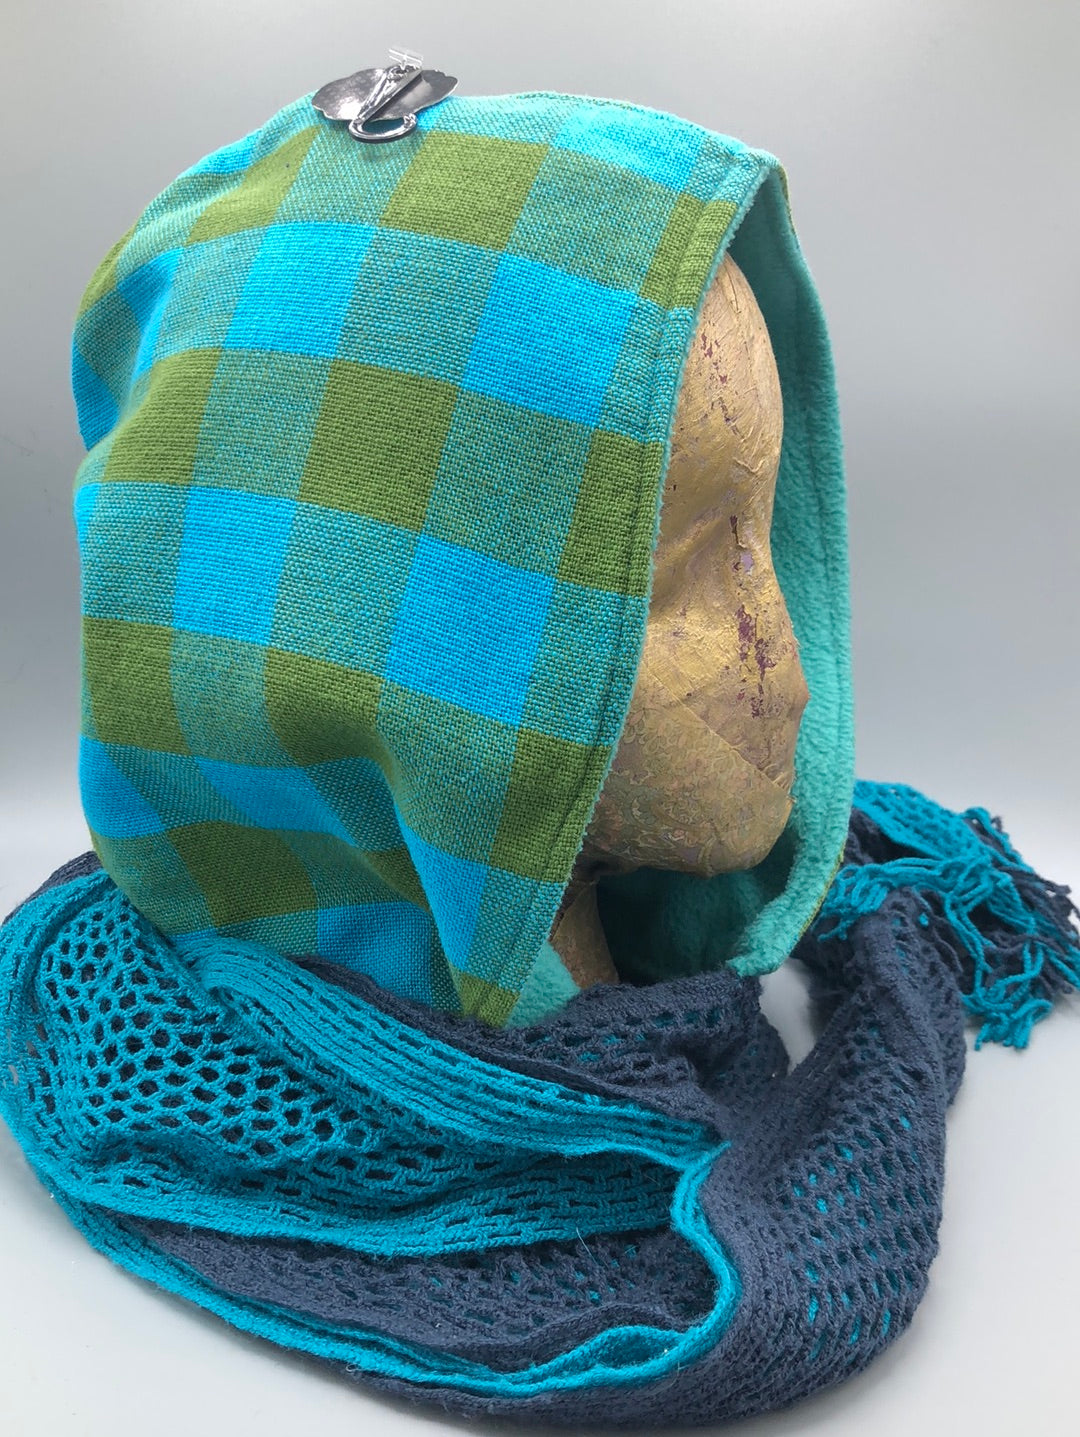 Vintage Greenand Turquoise Woven Hood with light Turquoise Fleece Liner and open knit two tone Scarf